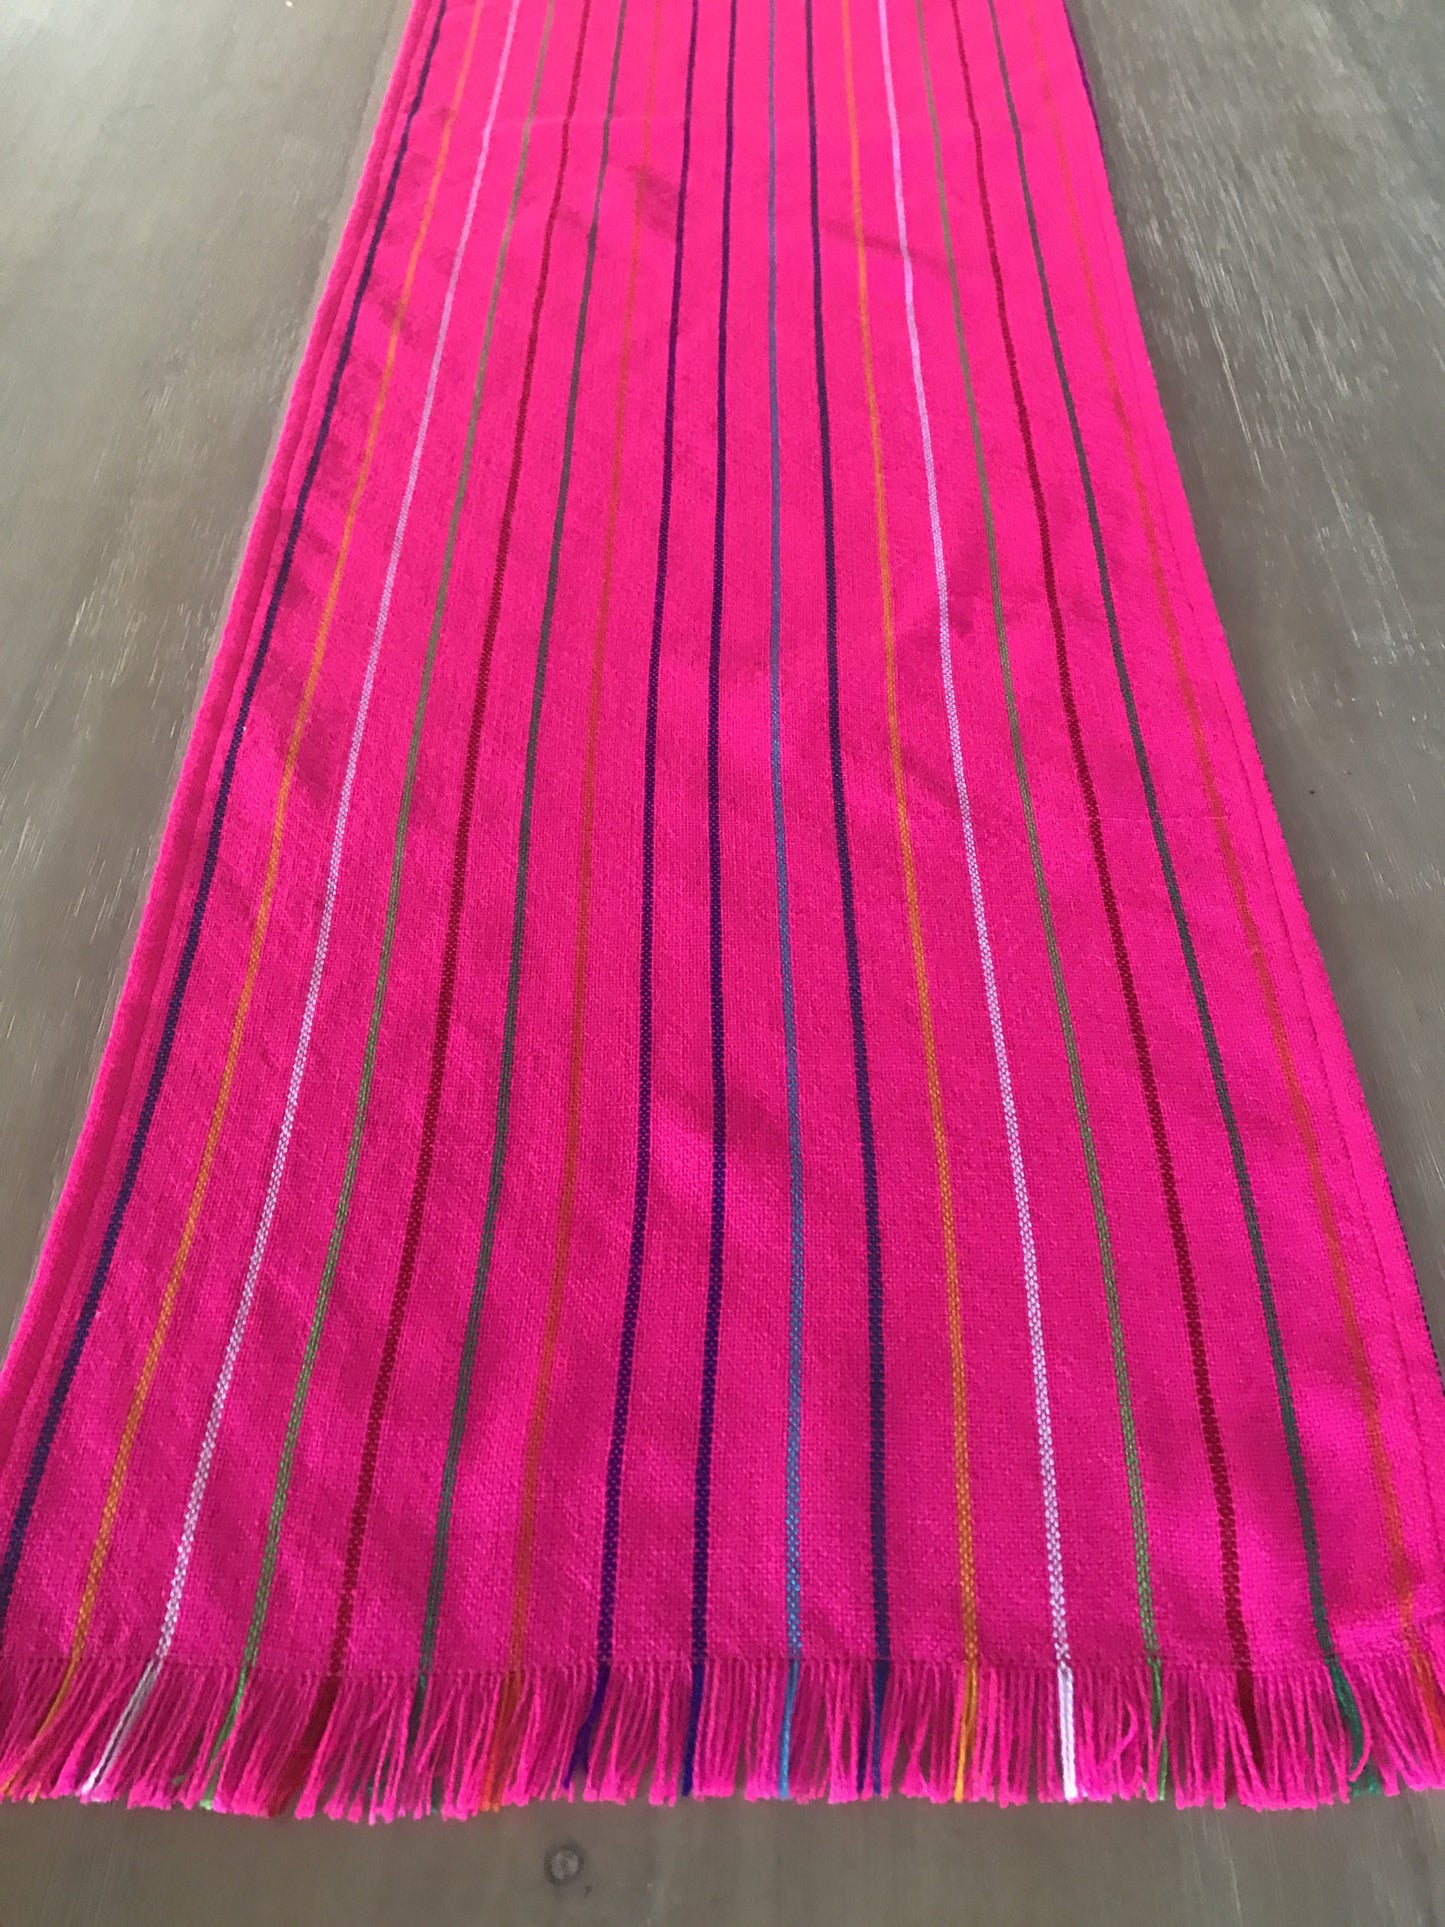 Mexican fabric Table Runner Colorful Pink stripes - MesaChic - 4